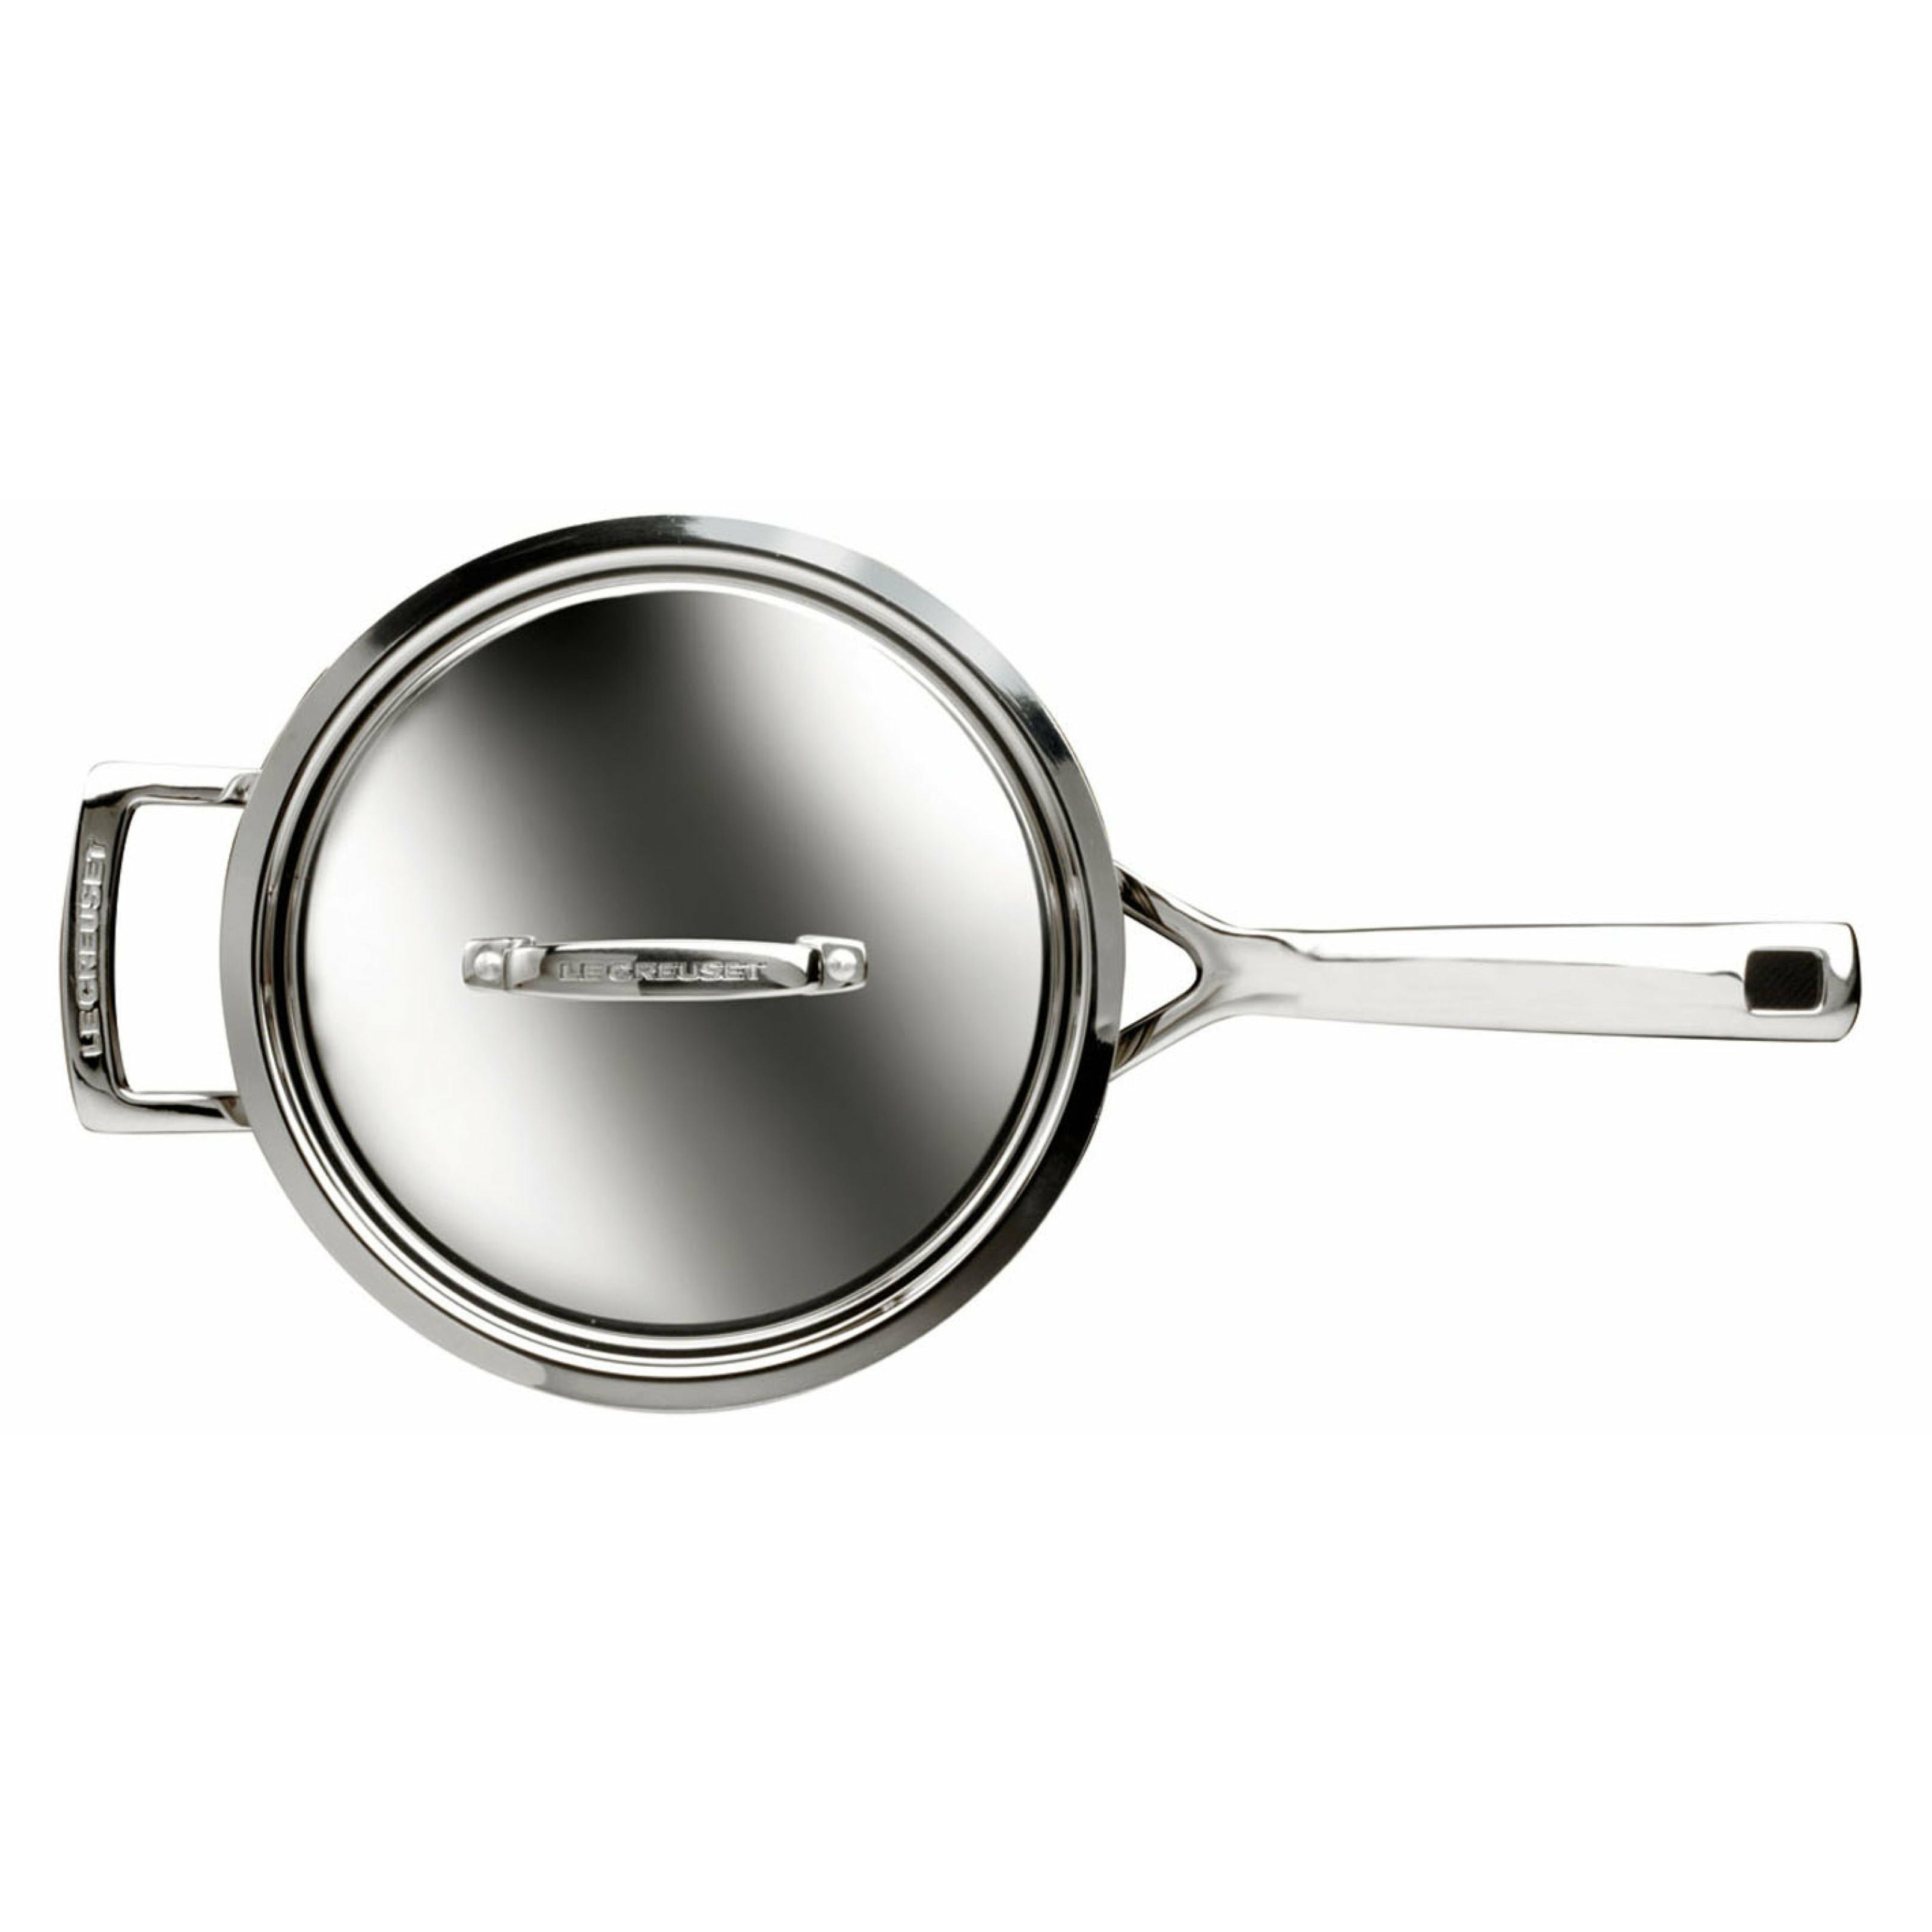 Le Creuset 3 Ply Stainless Steel Saucepan With Lid 2.8 L, 18 Cm